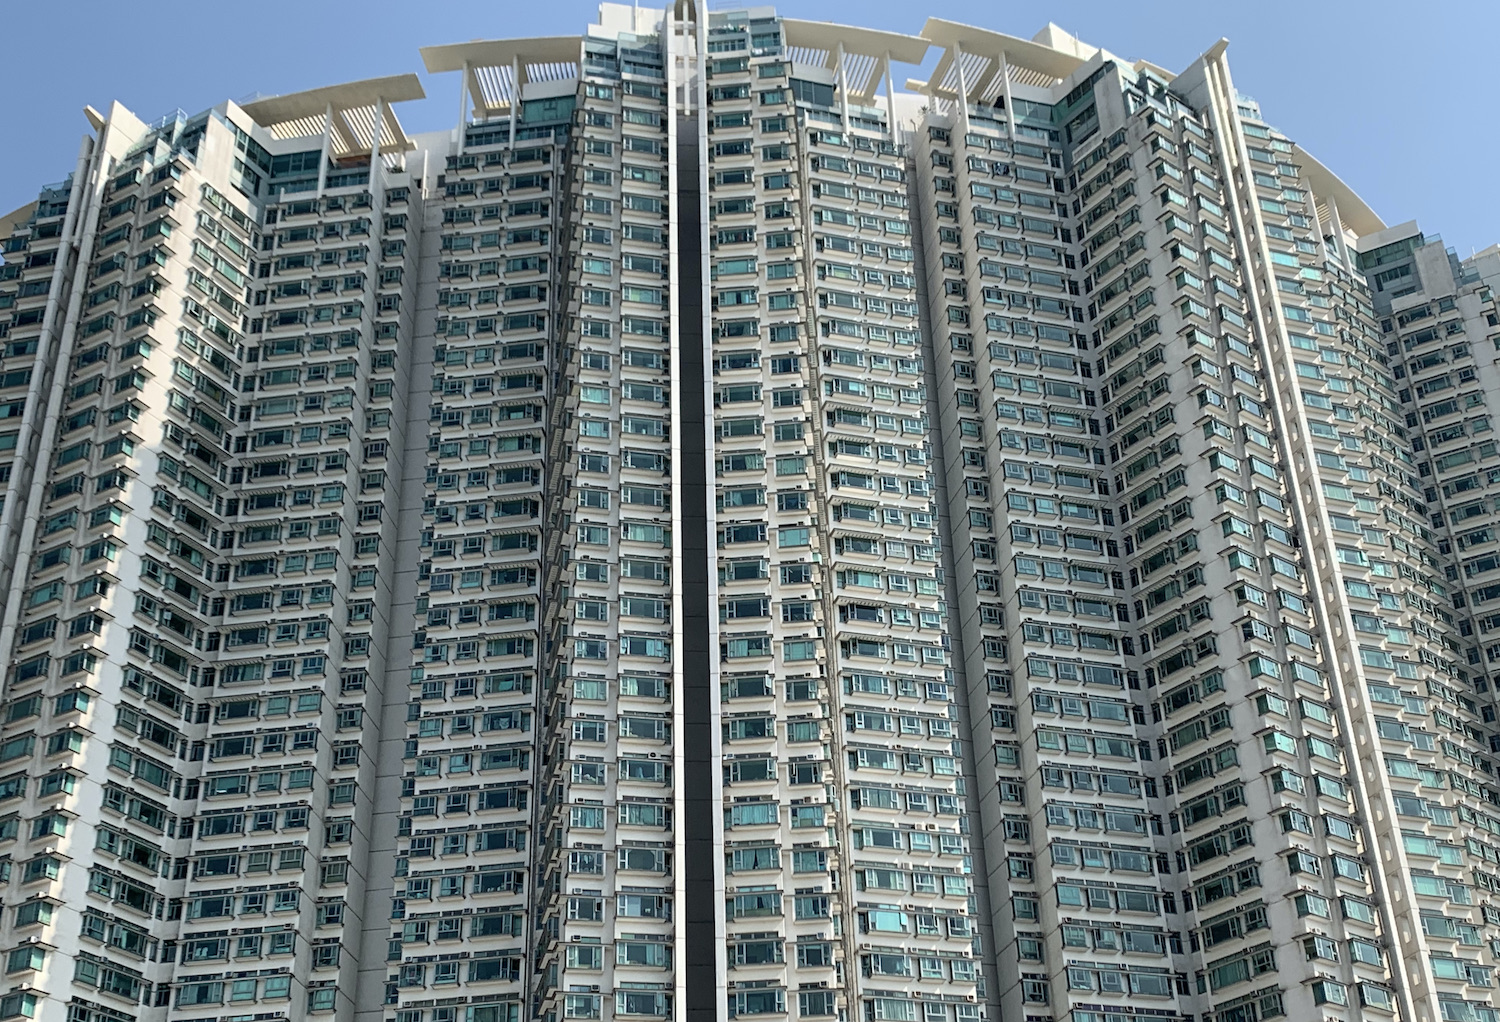 New Skyscrapers (Tung Chung)